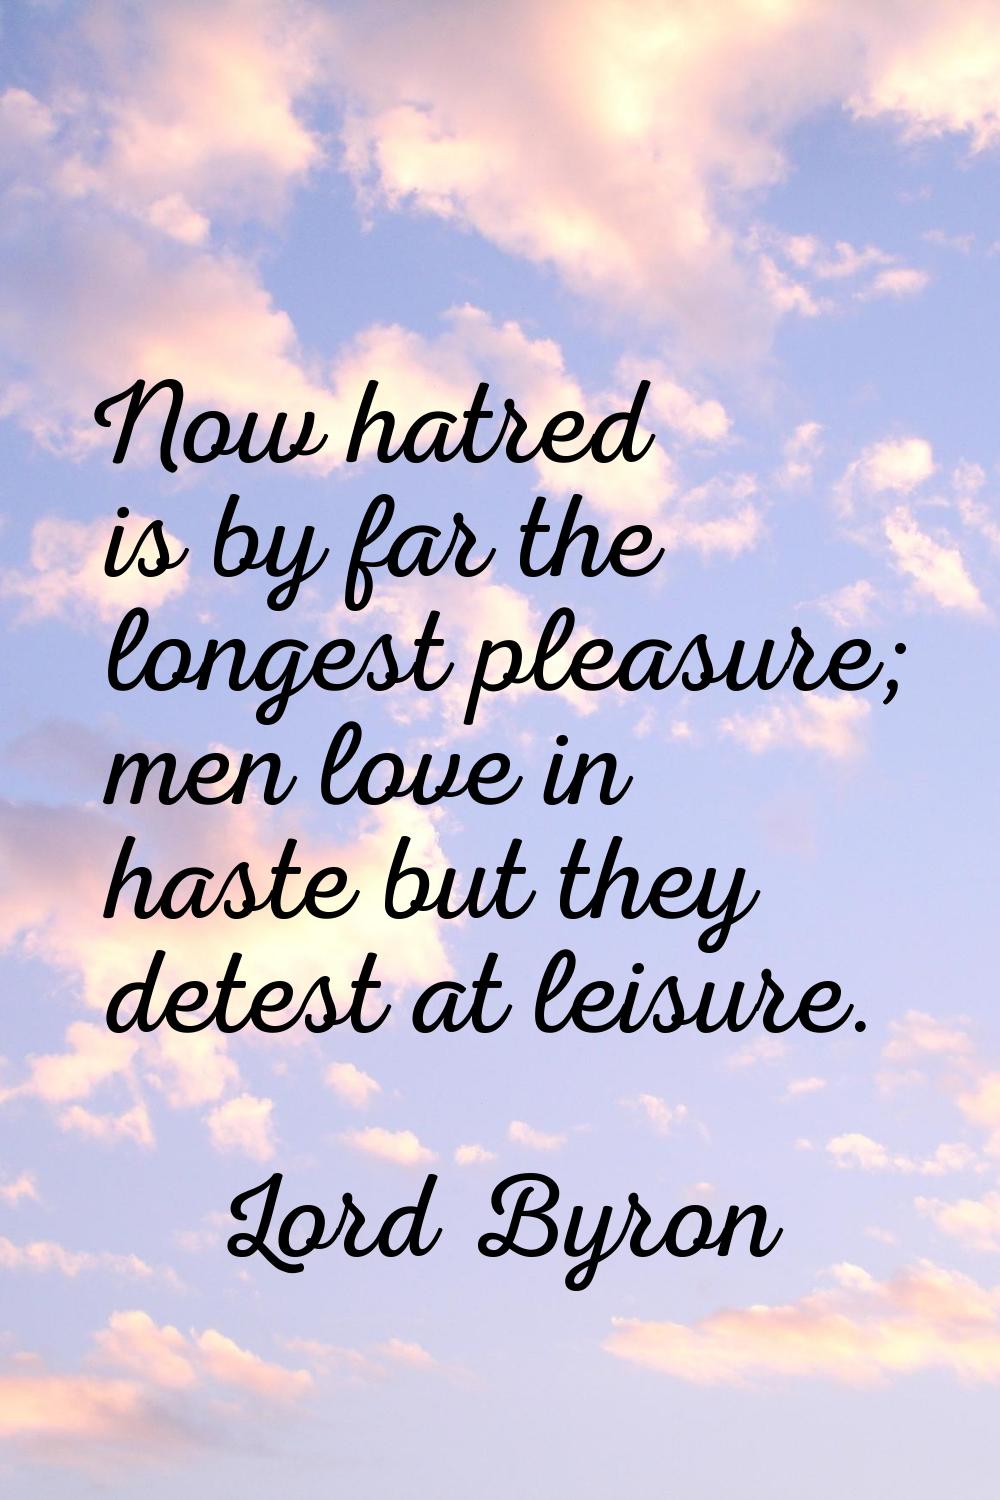 Now hatred is by far the longest pleasure; men love in haste but they detest at leisure.